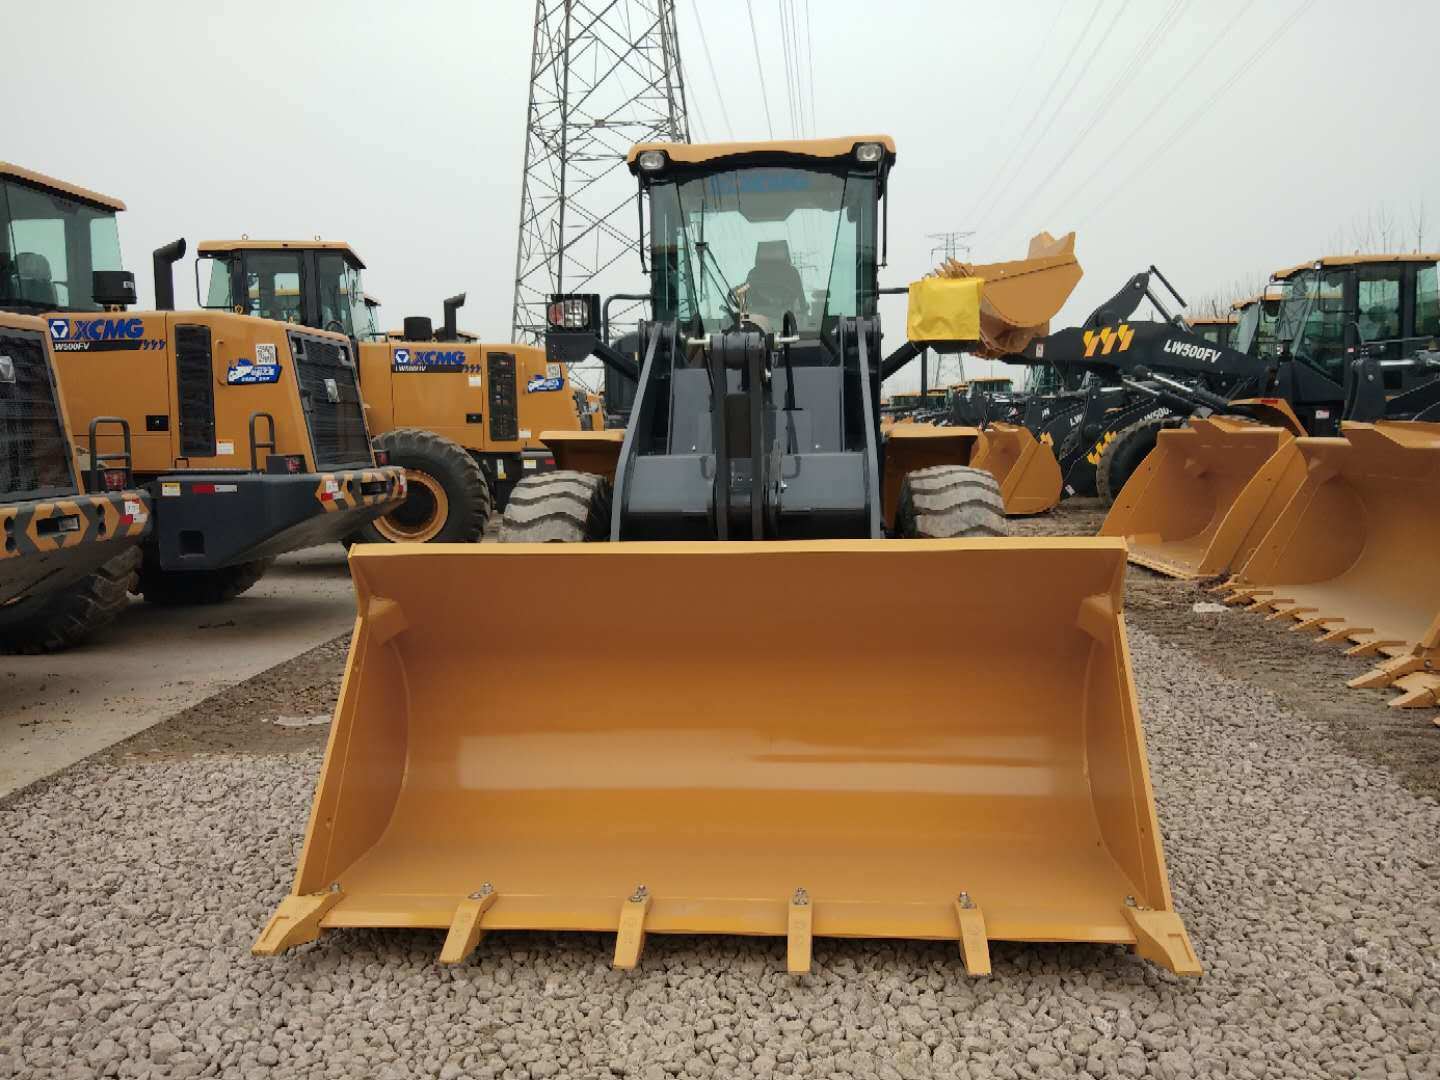 Xugong Zl50gn 5 Ton Wheel Loader with Shangchai Engine and Zf Gearbox